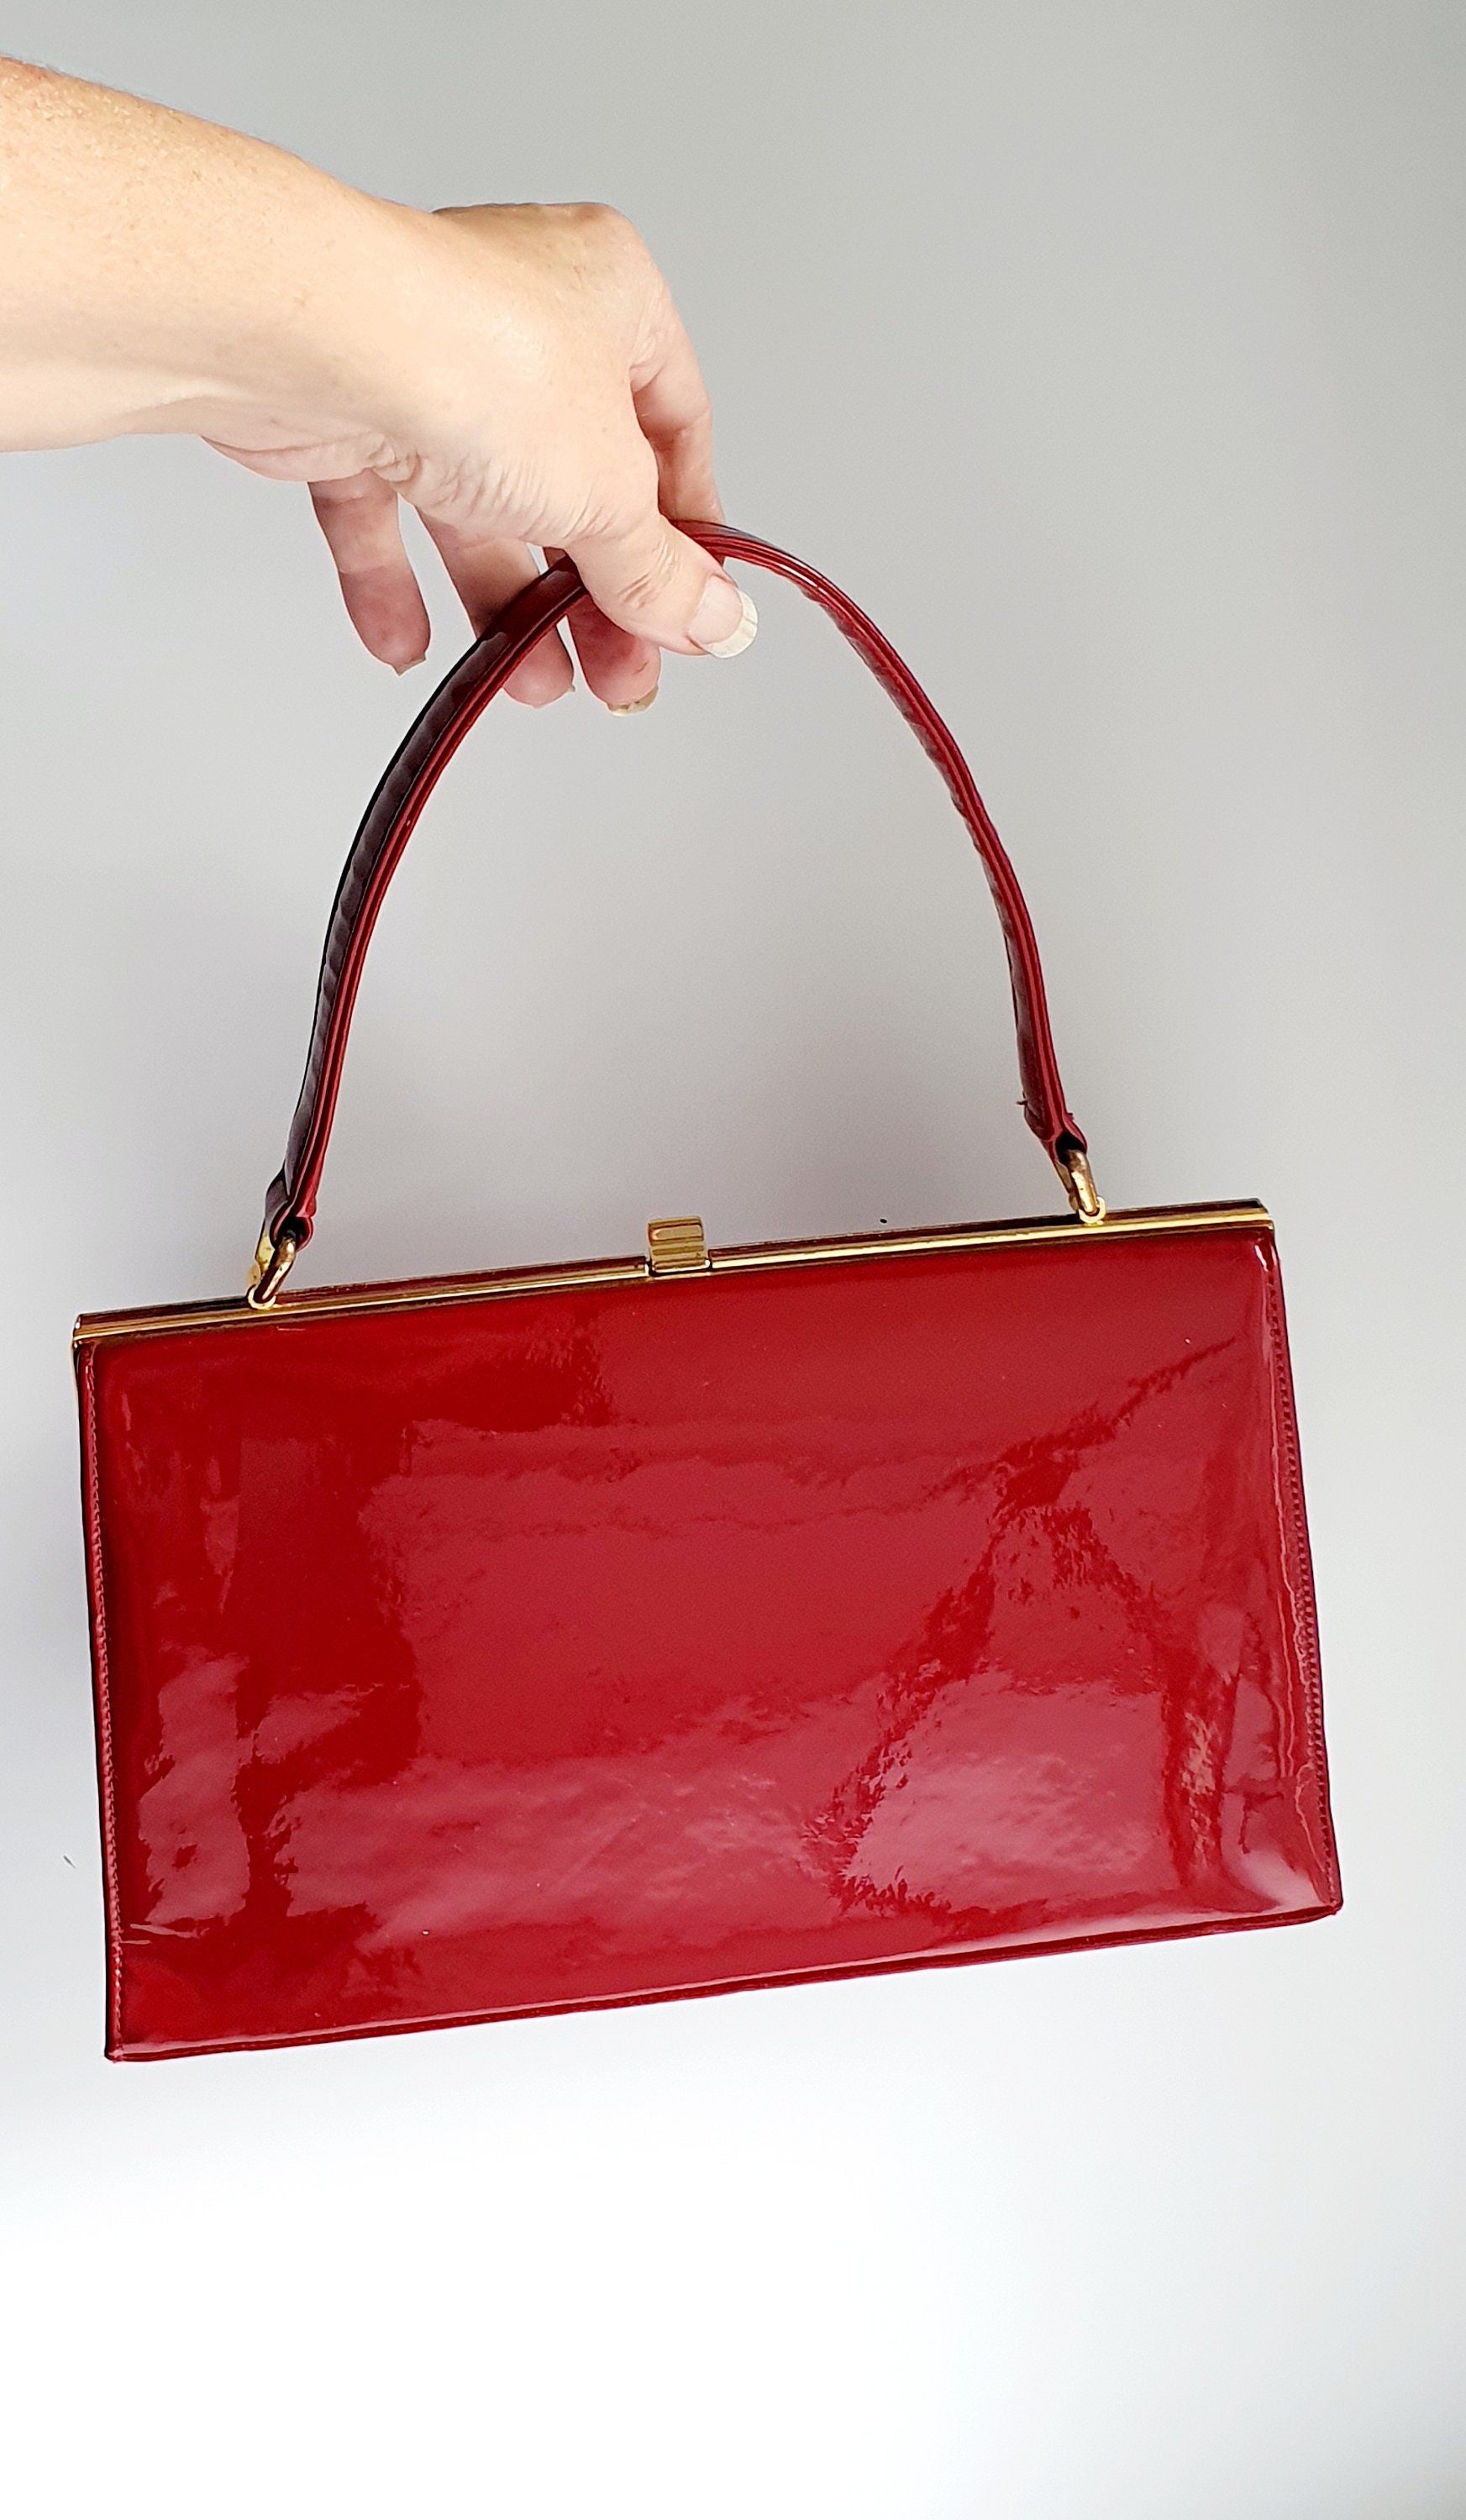 1950s, Red Patent Leather Handbag, Holmes of Norwich, Vintage Fifties  Fashion - Etsy